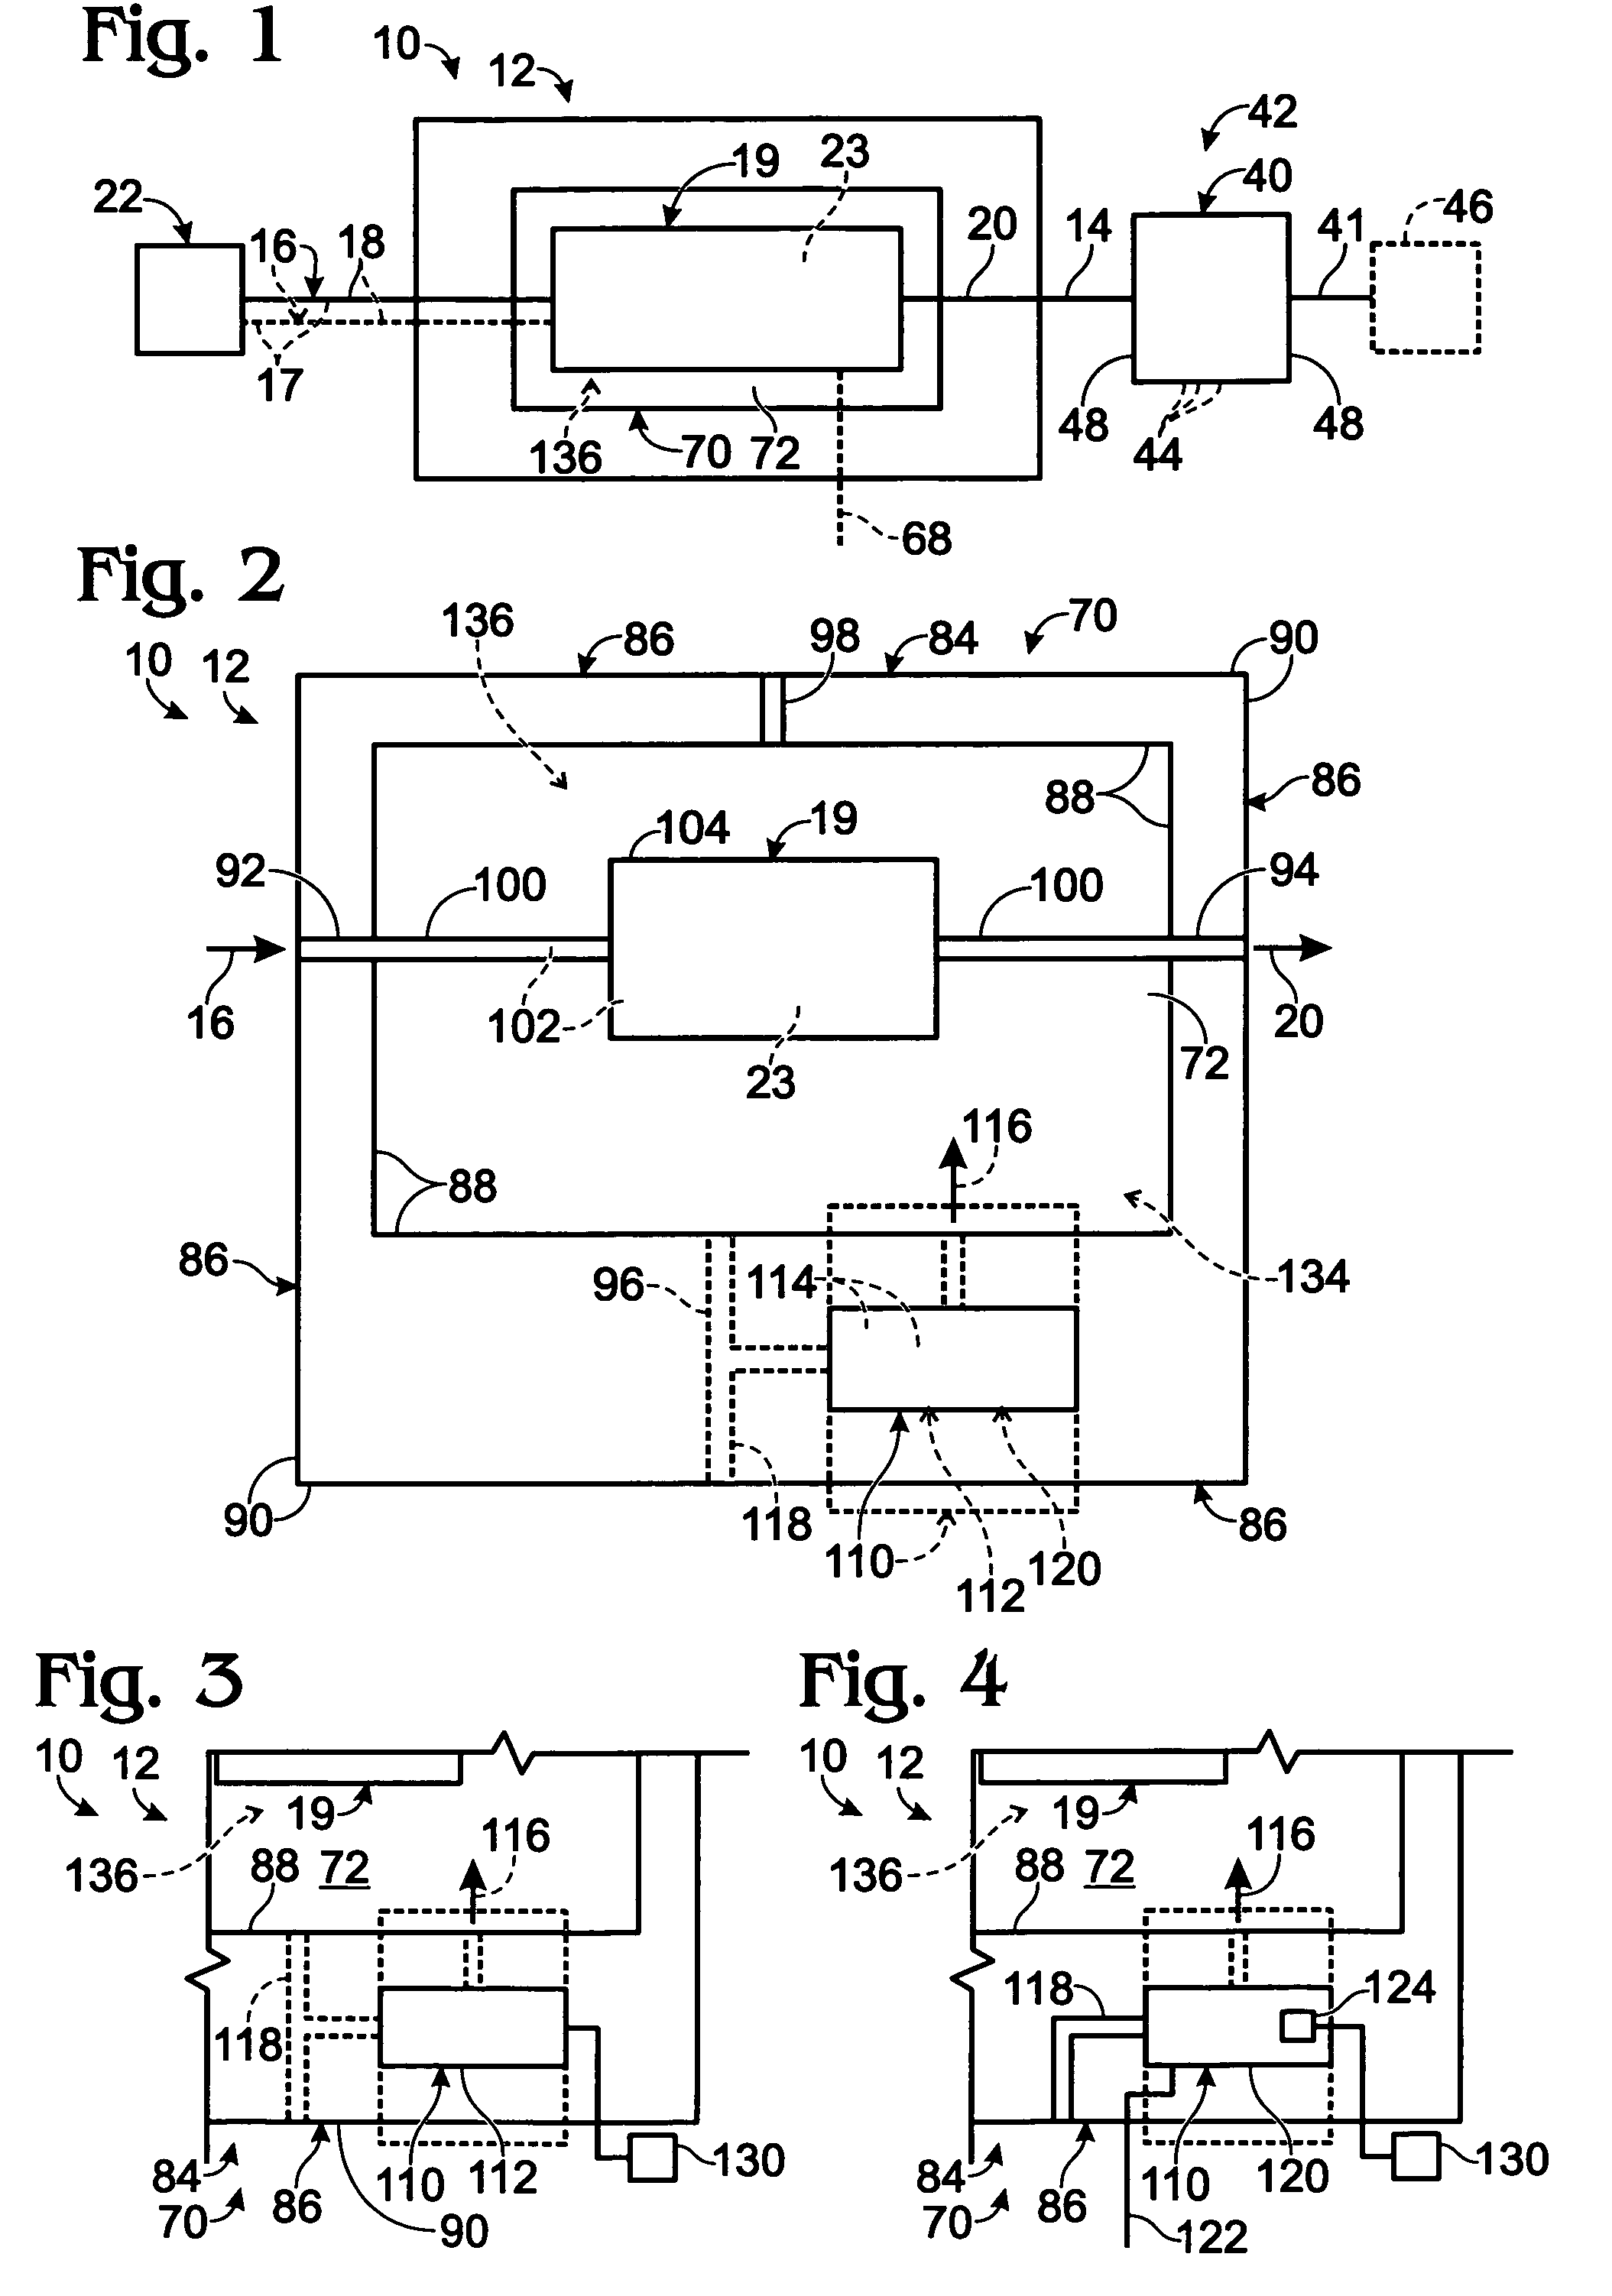 Thermally primed hydrogen-producing fuel cell system